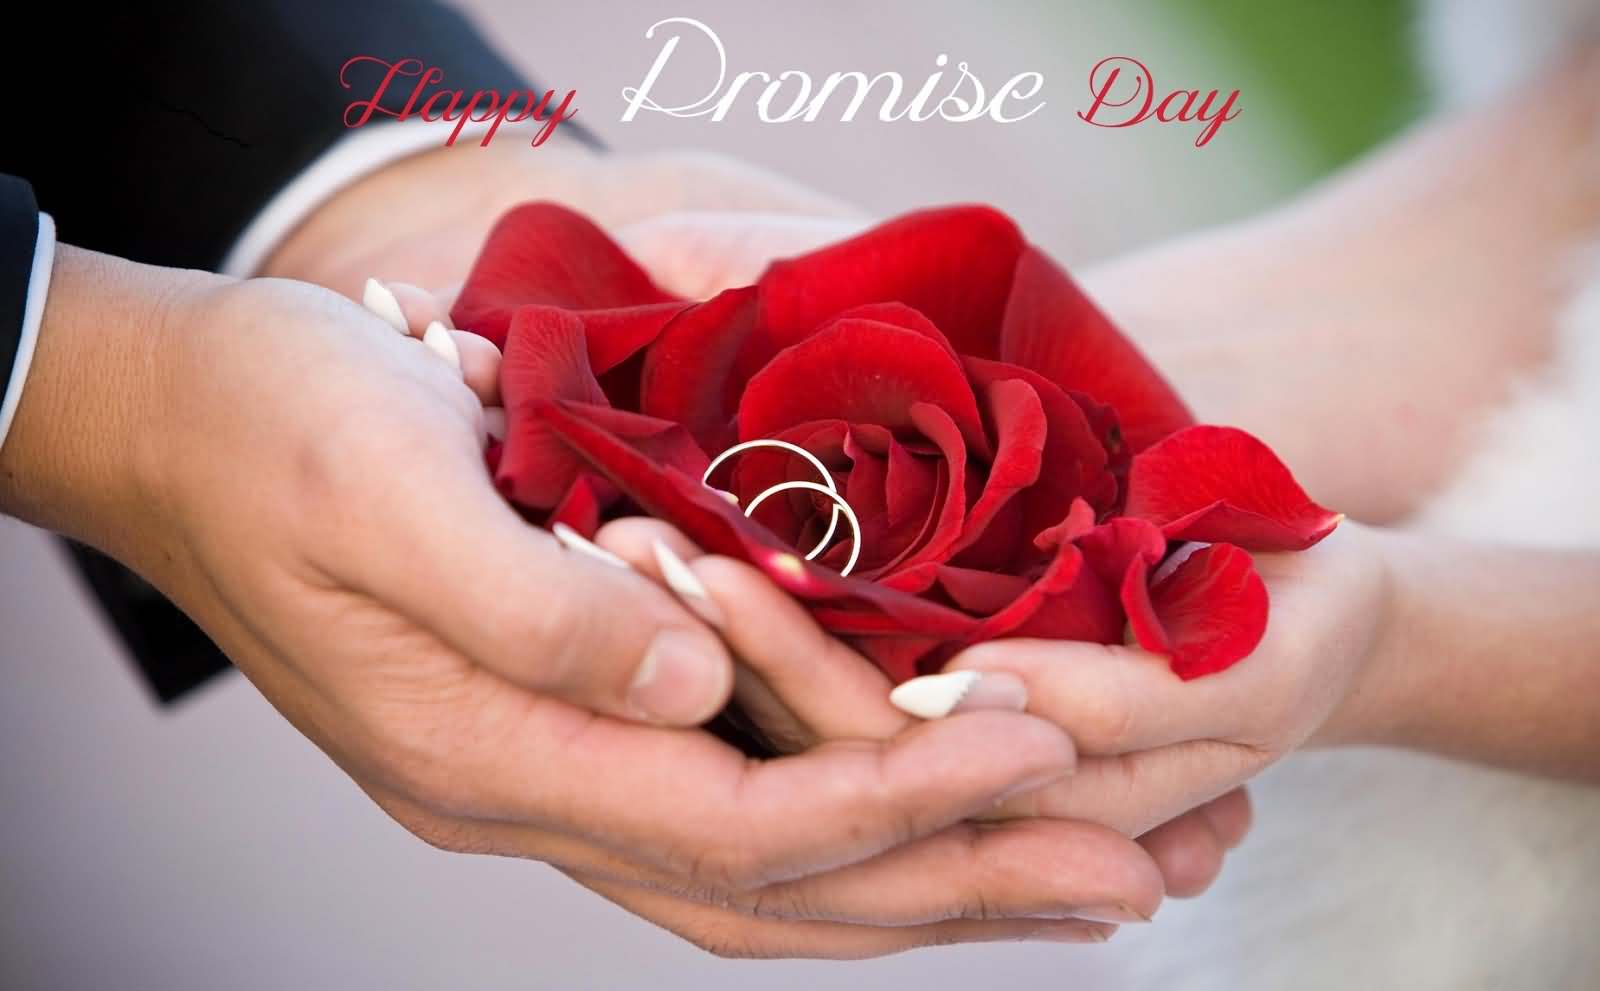 Happy promise day rose flower and wedding rings in hand